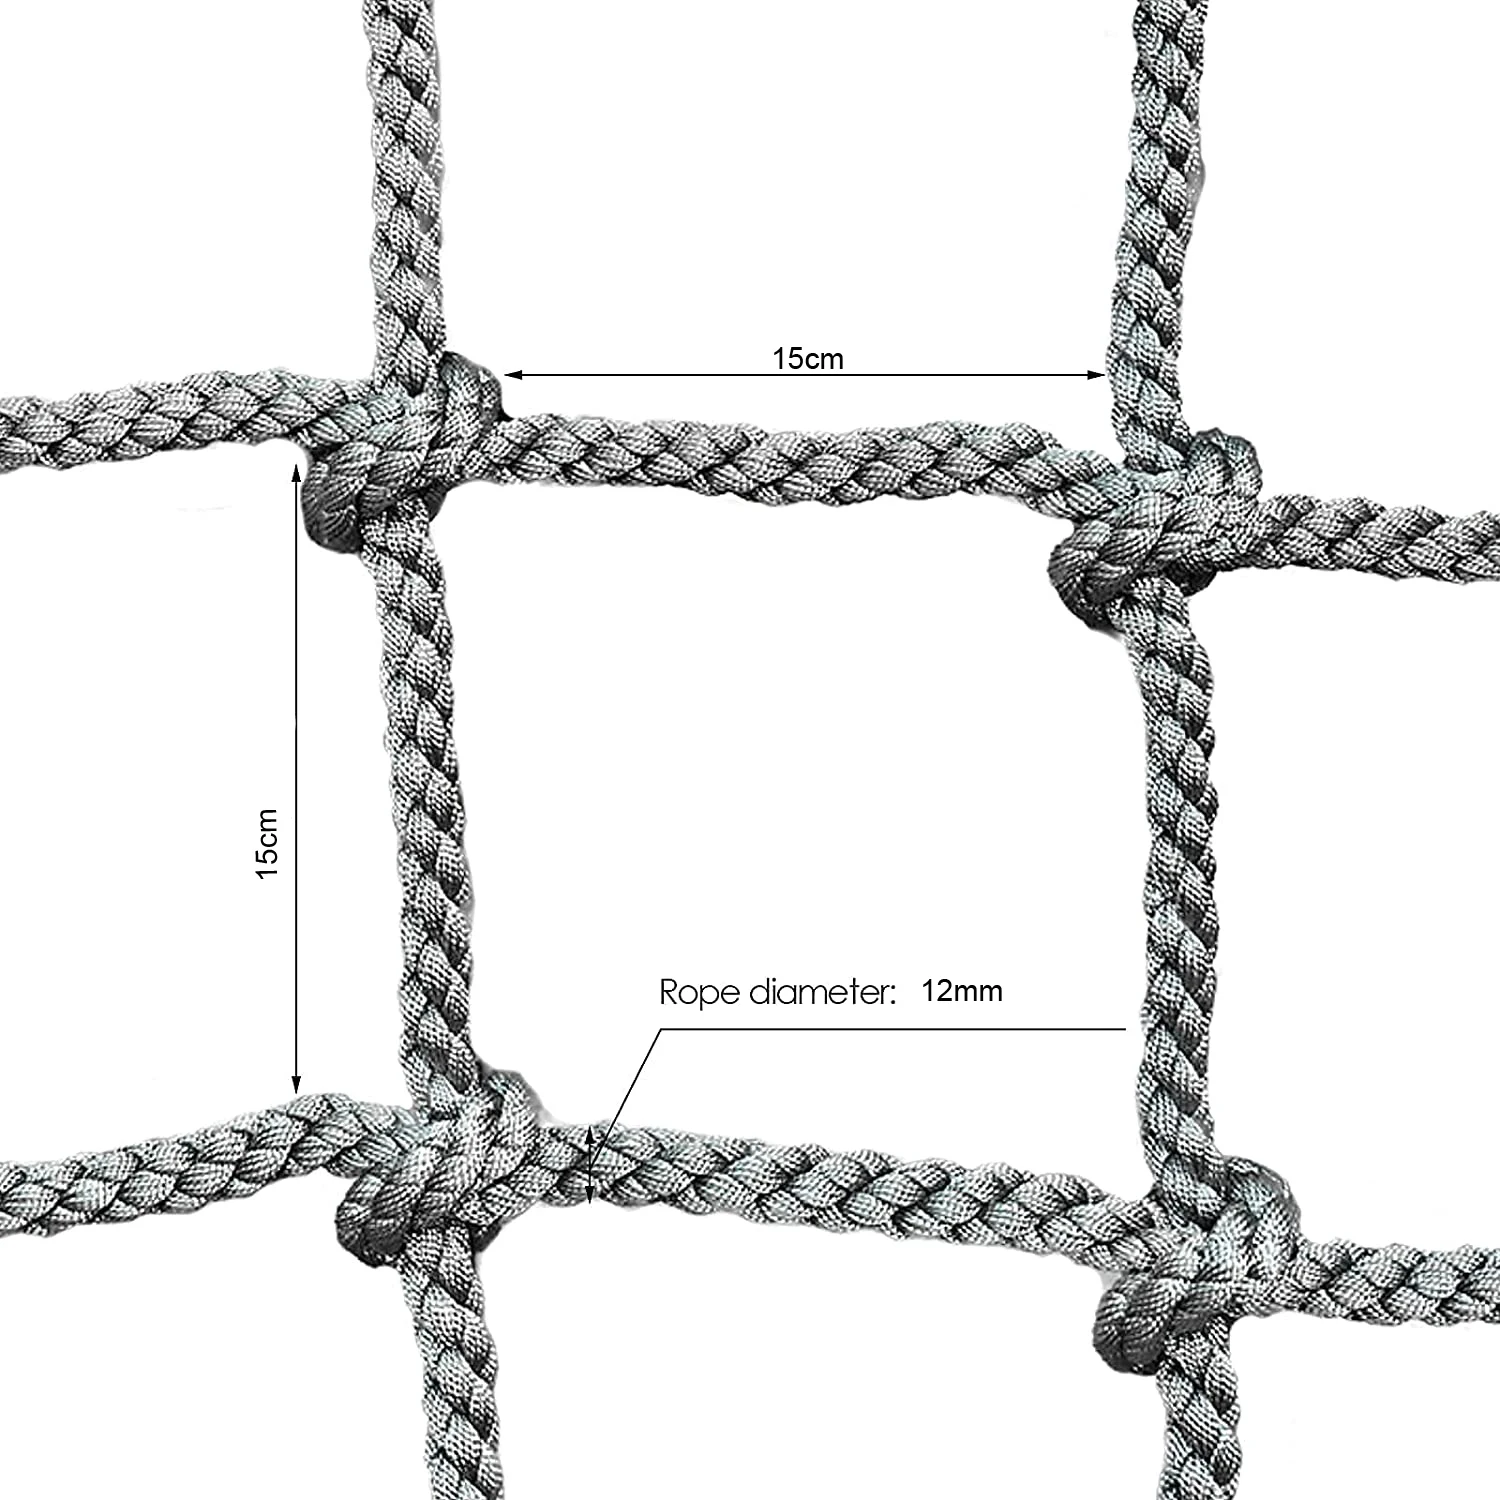 Hq Hr1 Nylon Rope Net Mesh For Ceiling Decoration Mesh Partition Protective  Fence Safety Net Game Climbing 4-20mm Diameter - Ropes - AliExpress